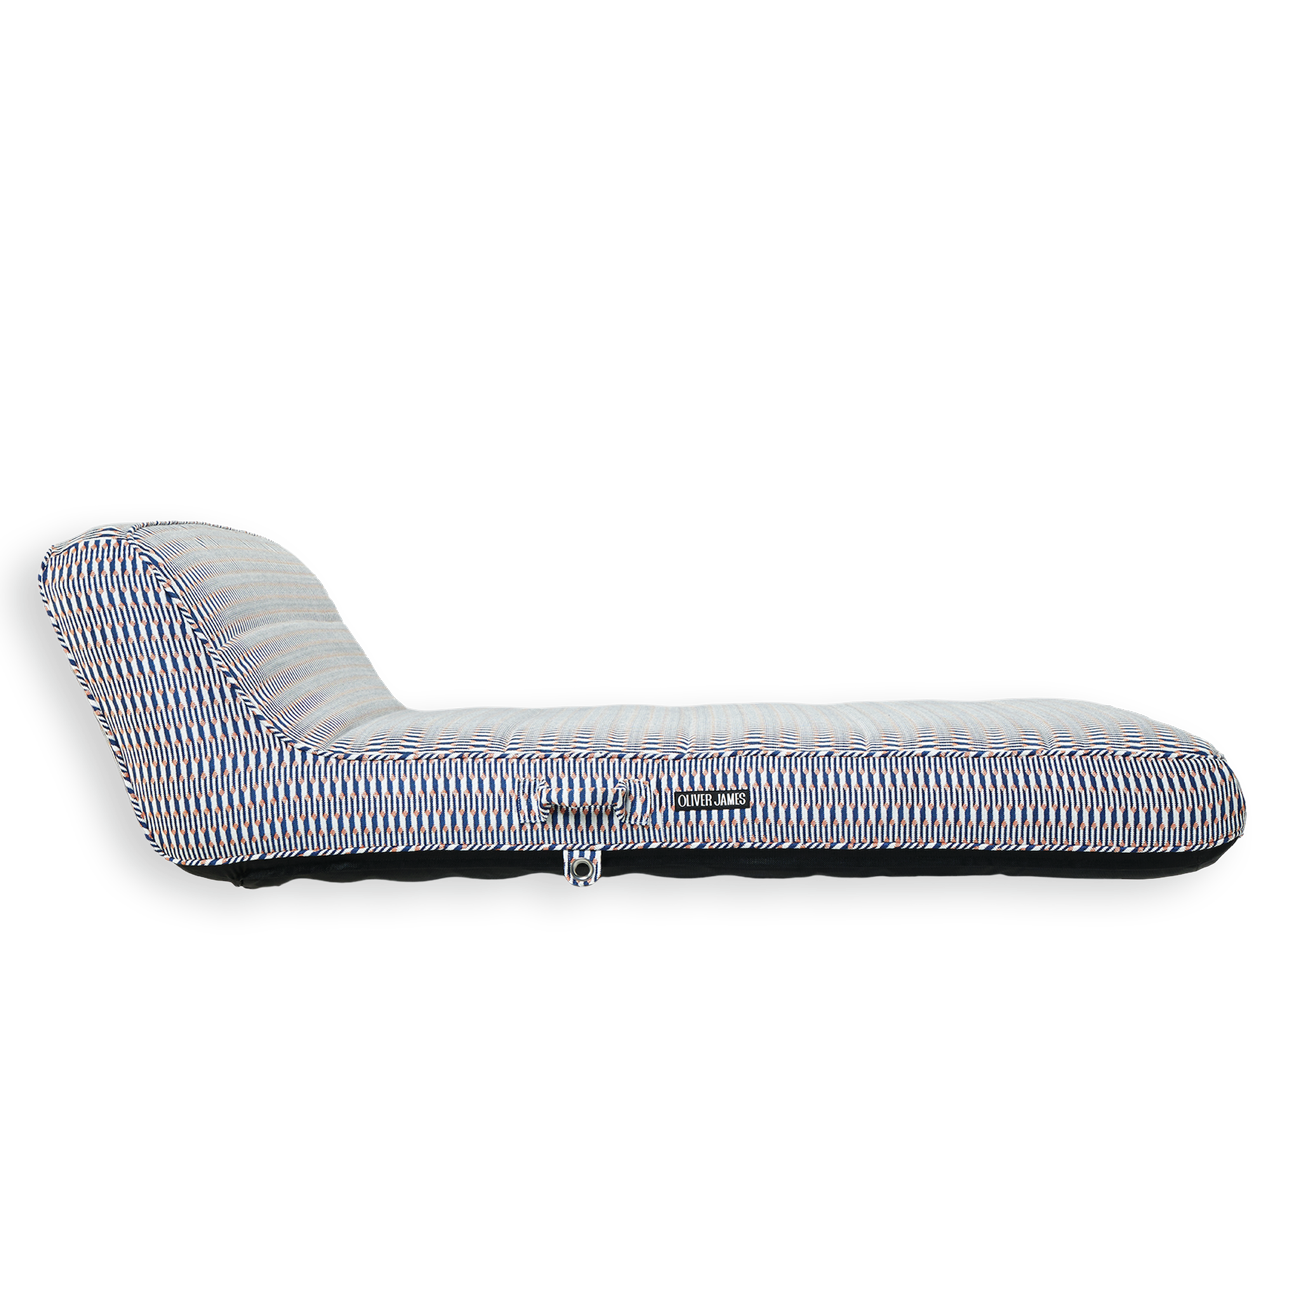 The side profile and backrest angle of a double red, white and orange luxury pool float.